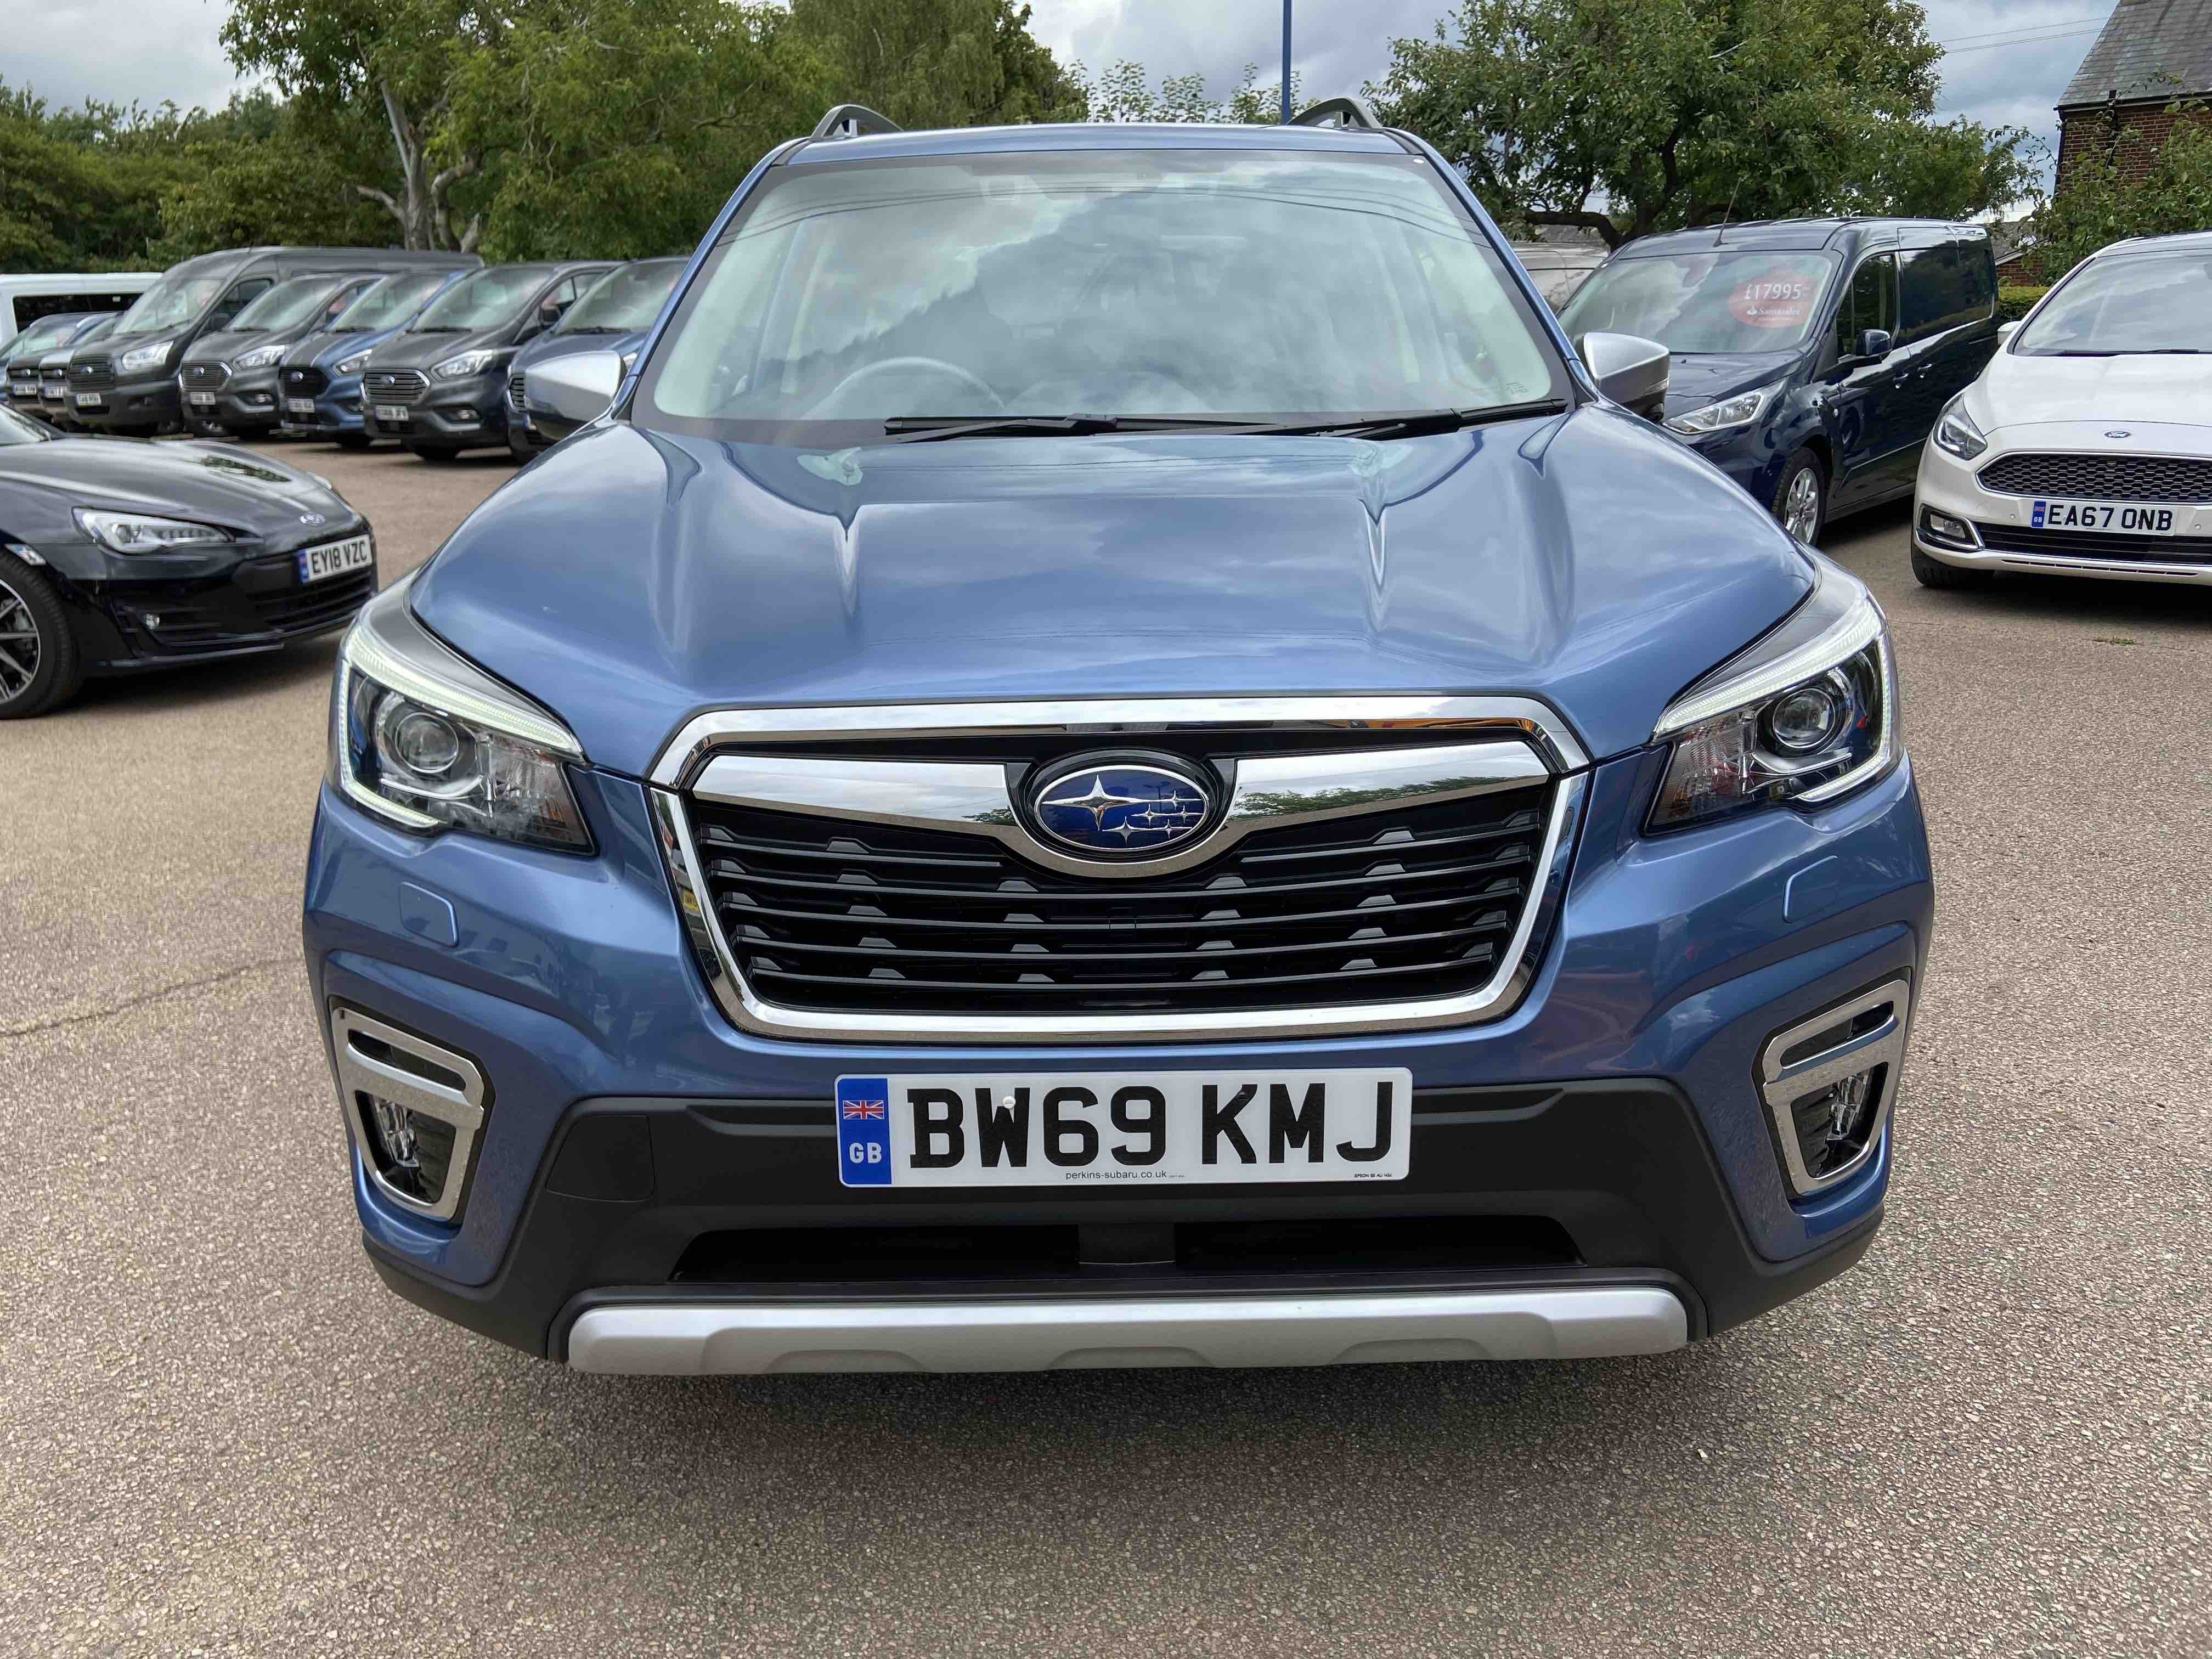 New Subaru Forester Hybrid Test Drive today Essex